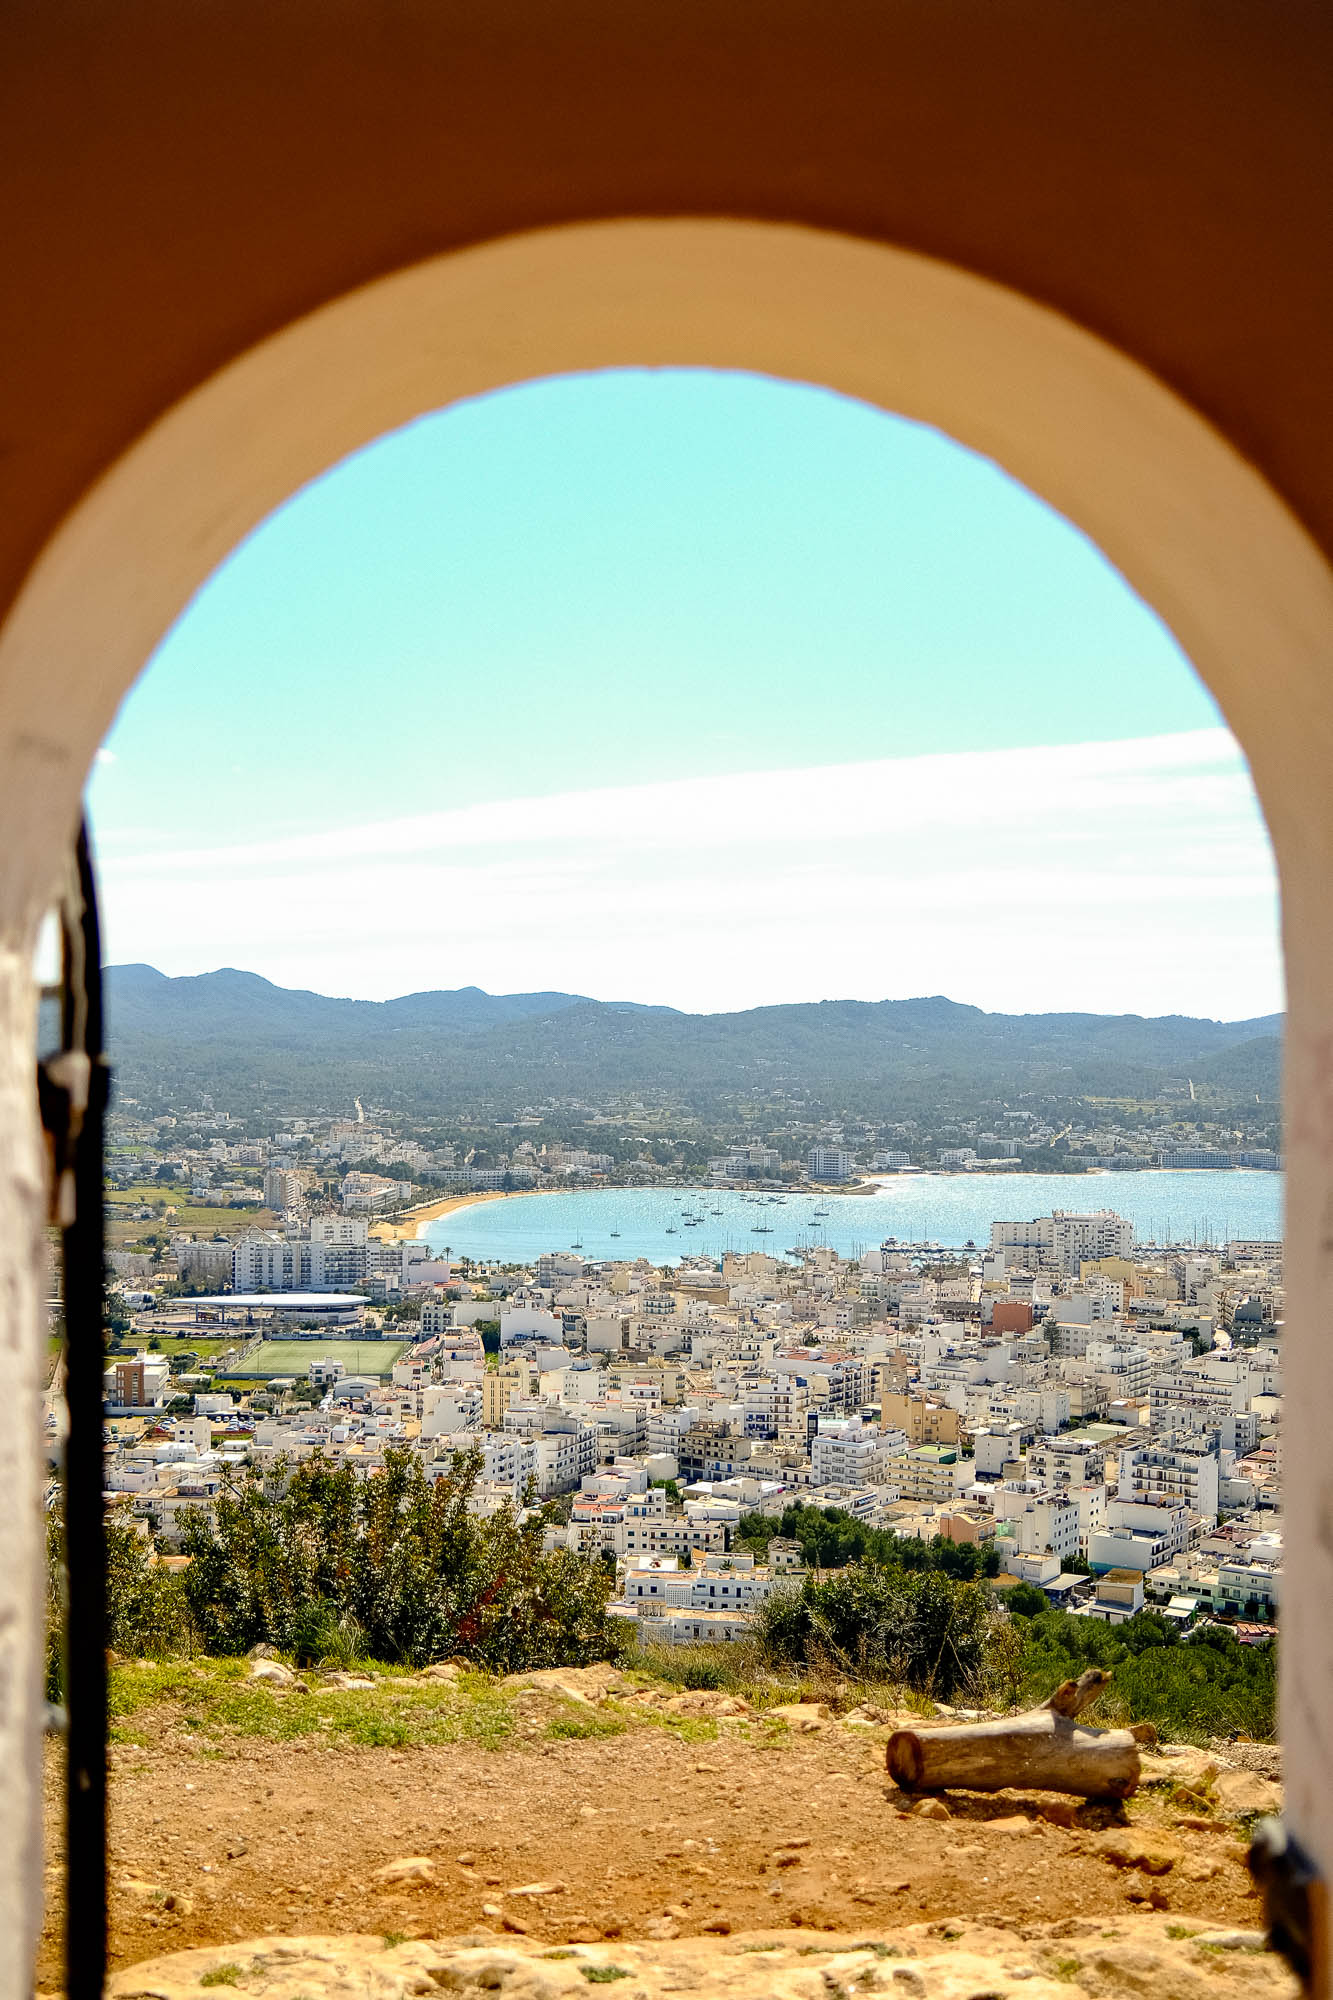 View through an archway of San Antonio Bay